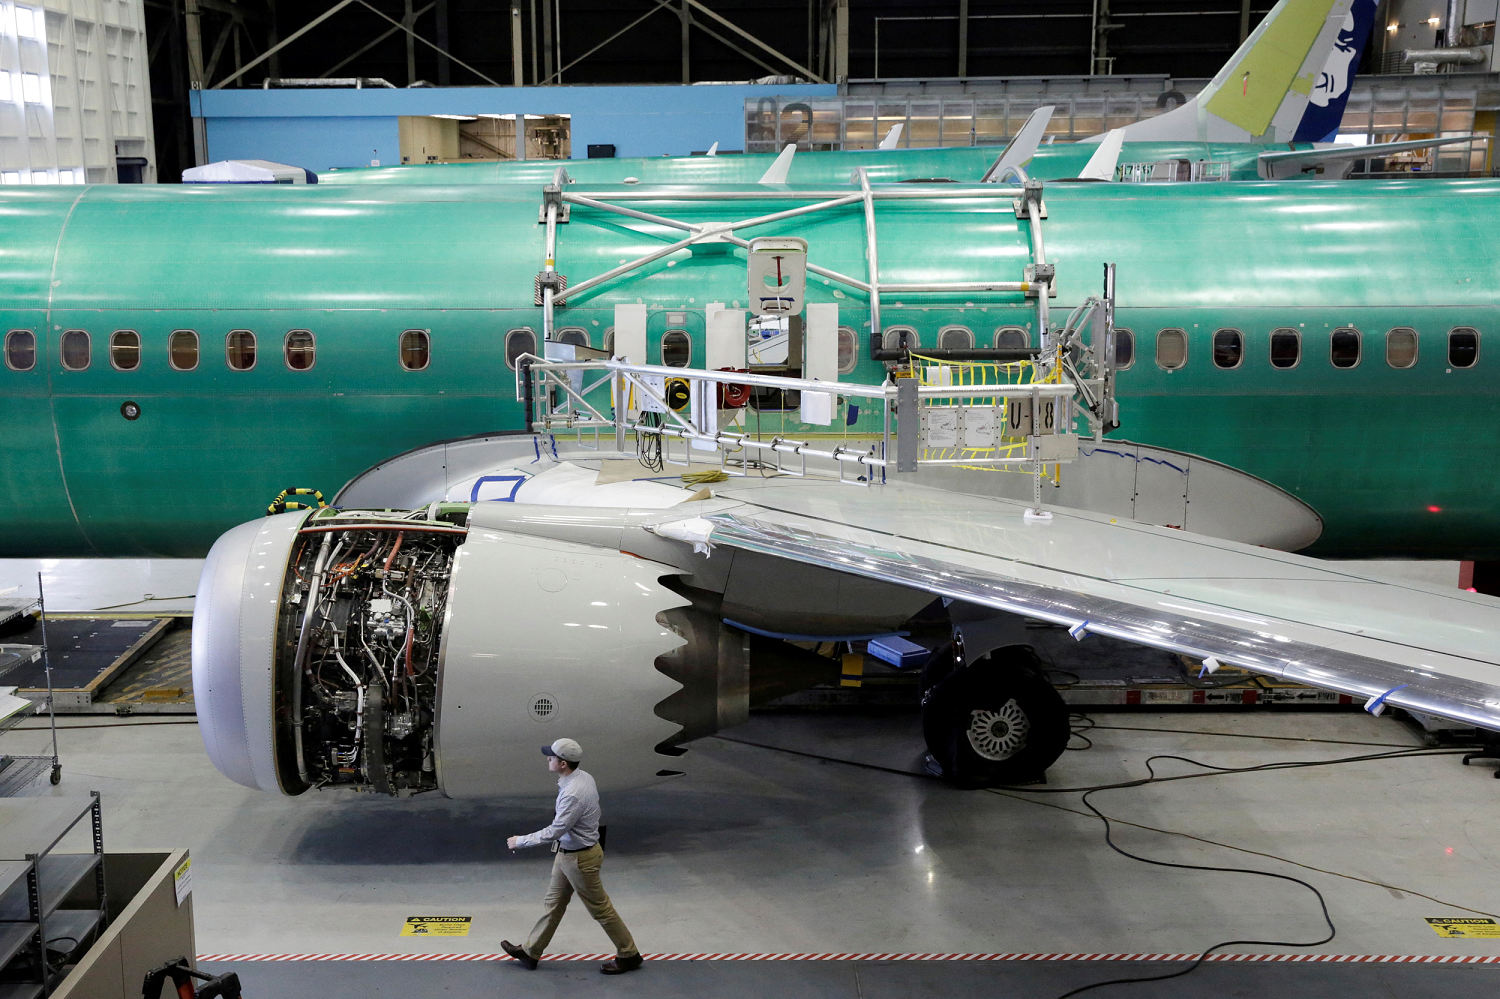 Boeing's safety culture is 'inadequate' and 'confusing', new FAA report finds